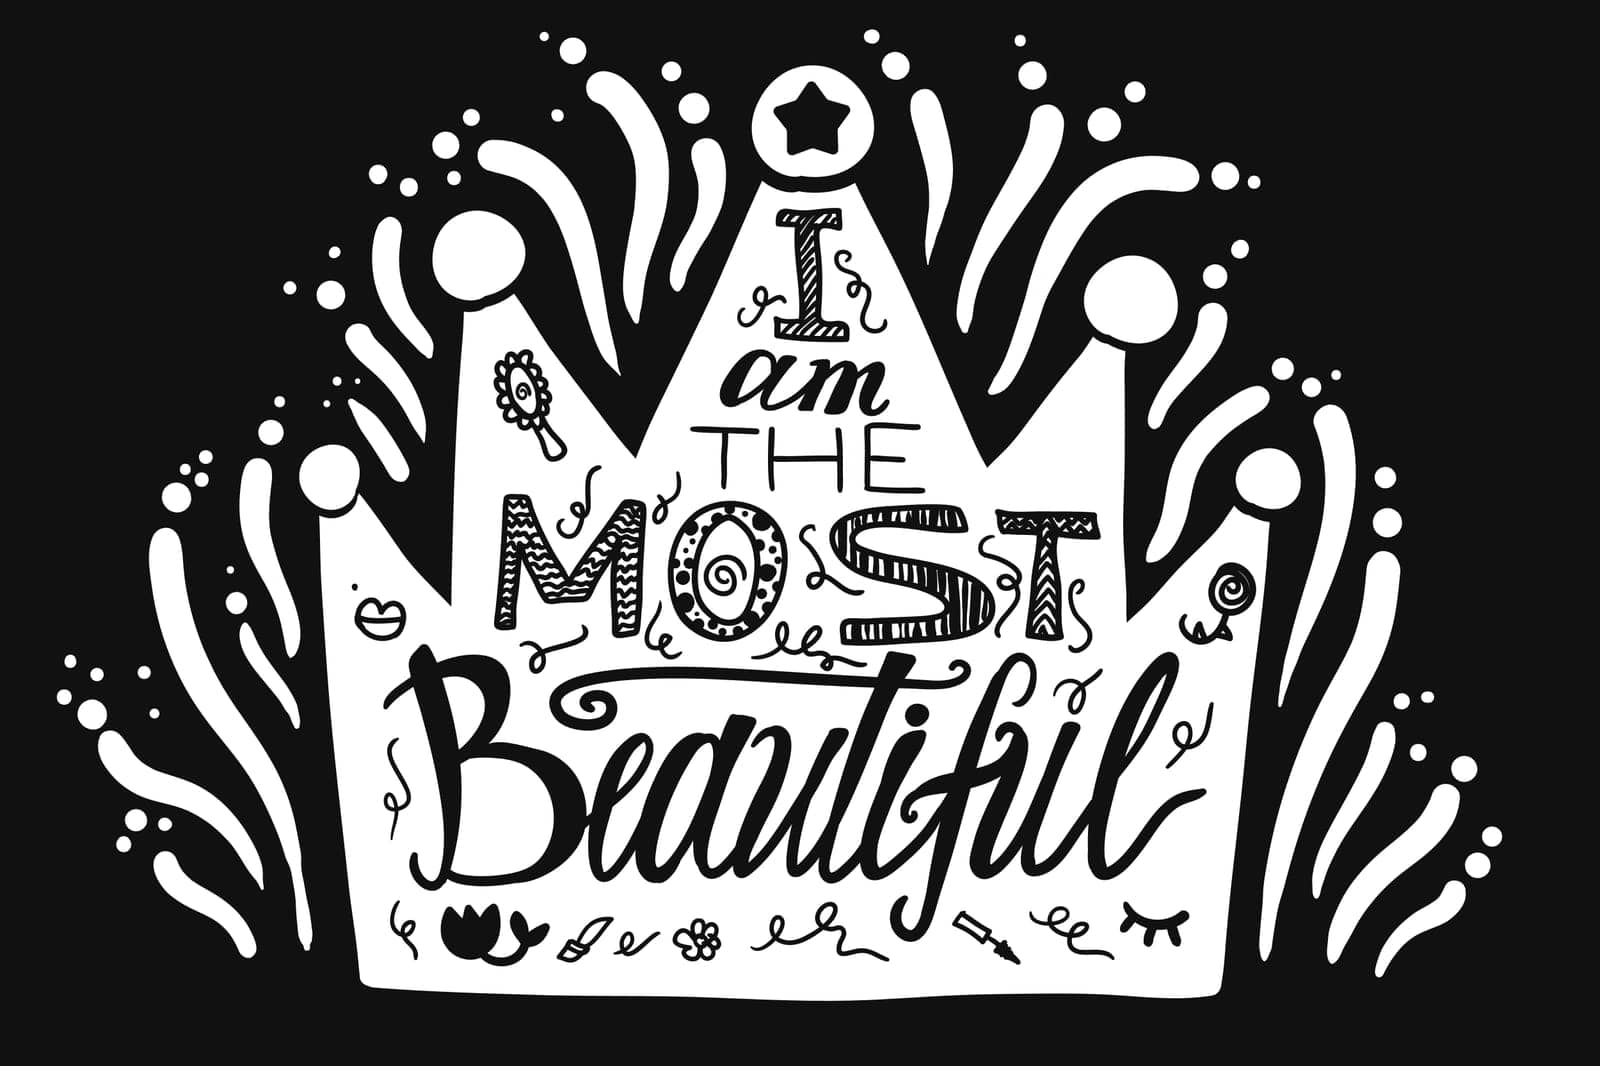 I am the most beautiful lettering by barsrsind